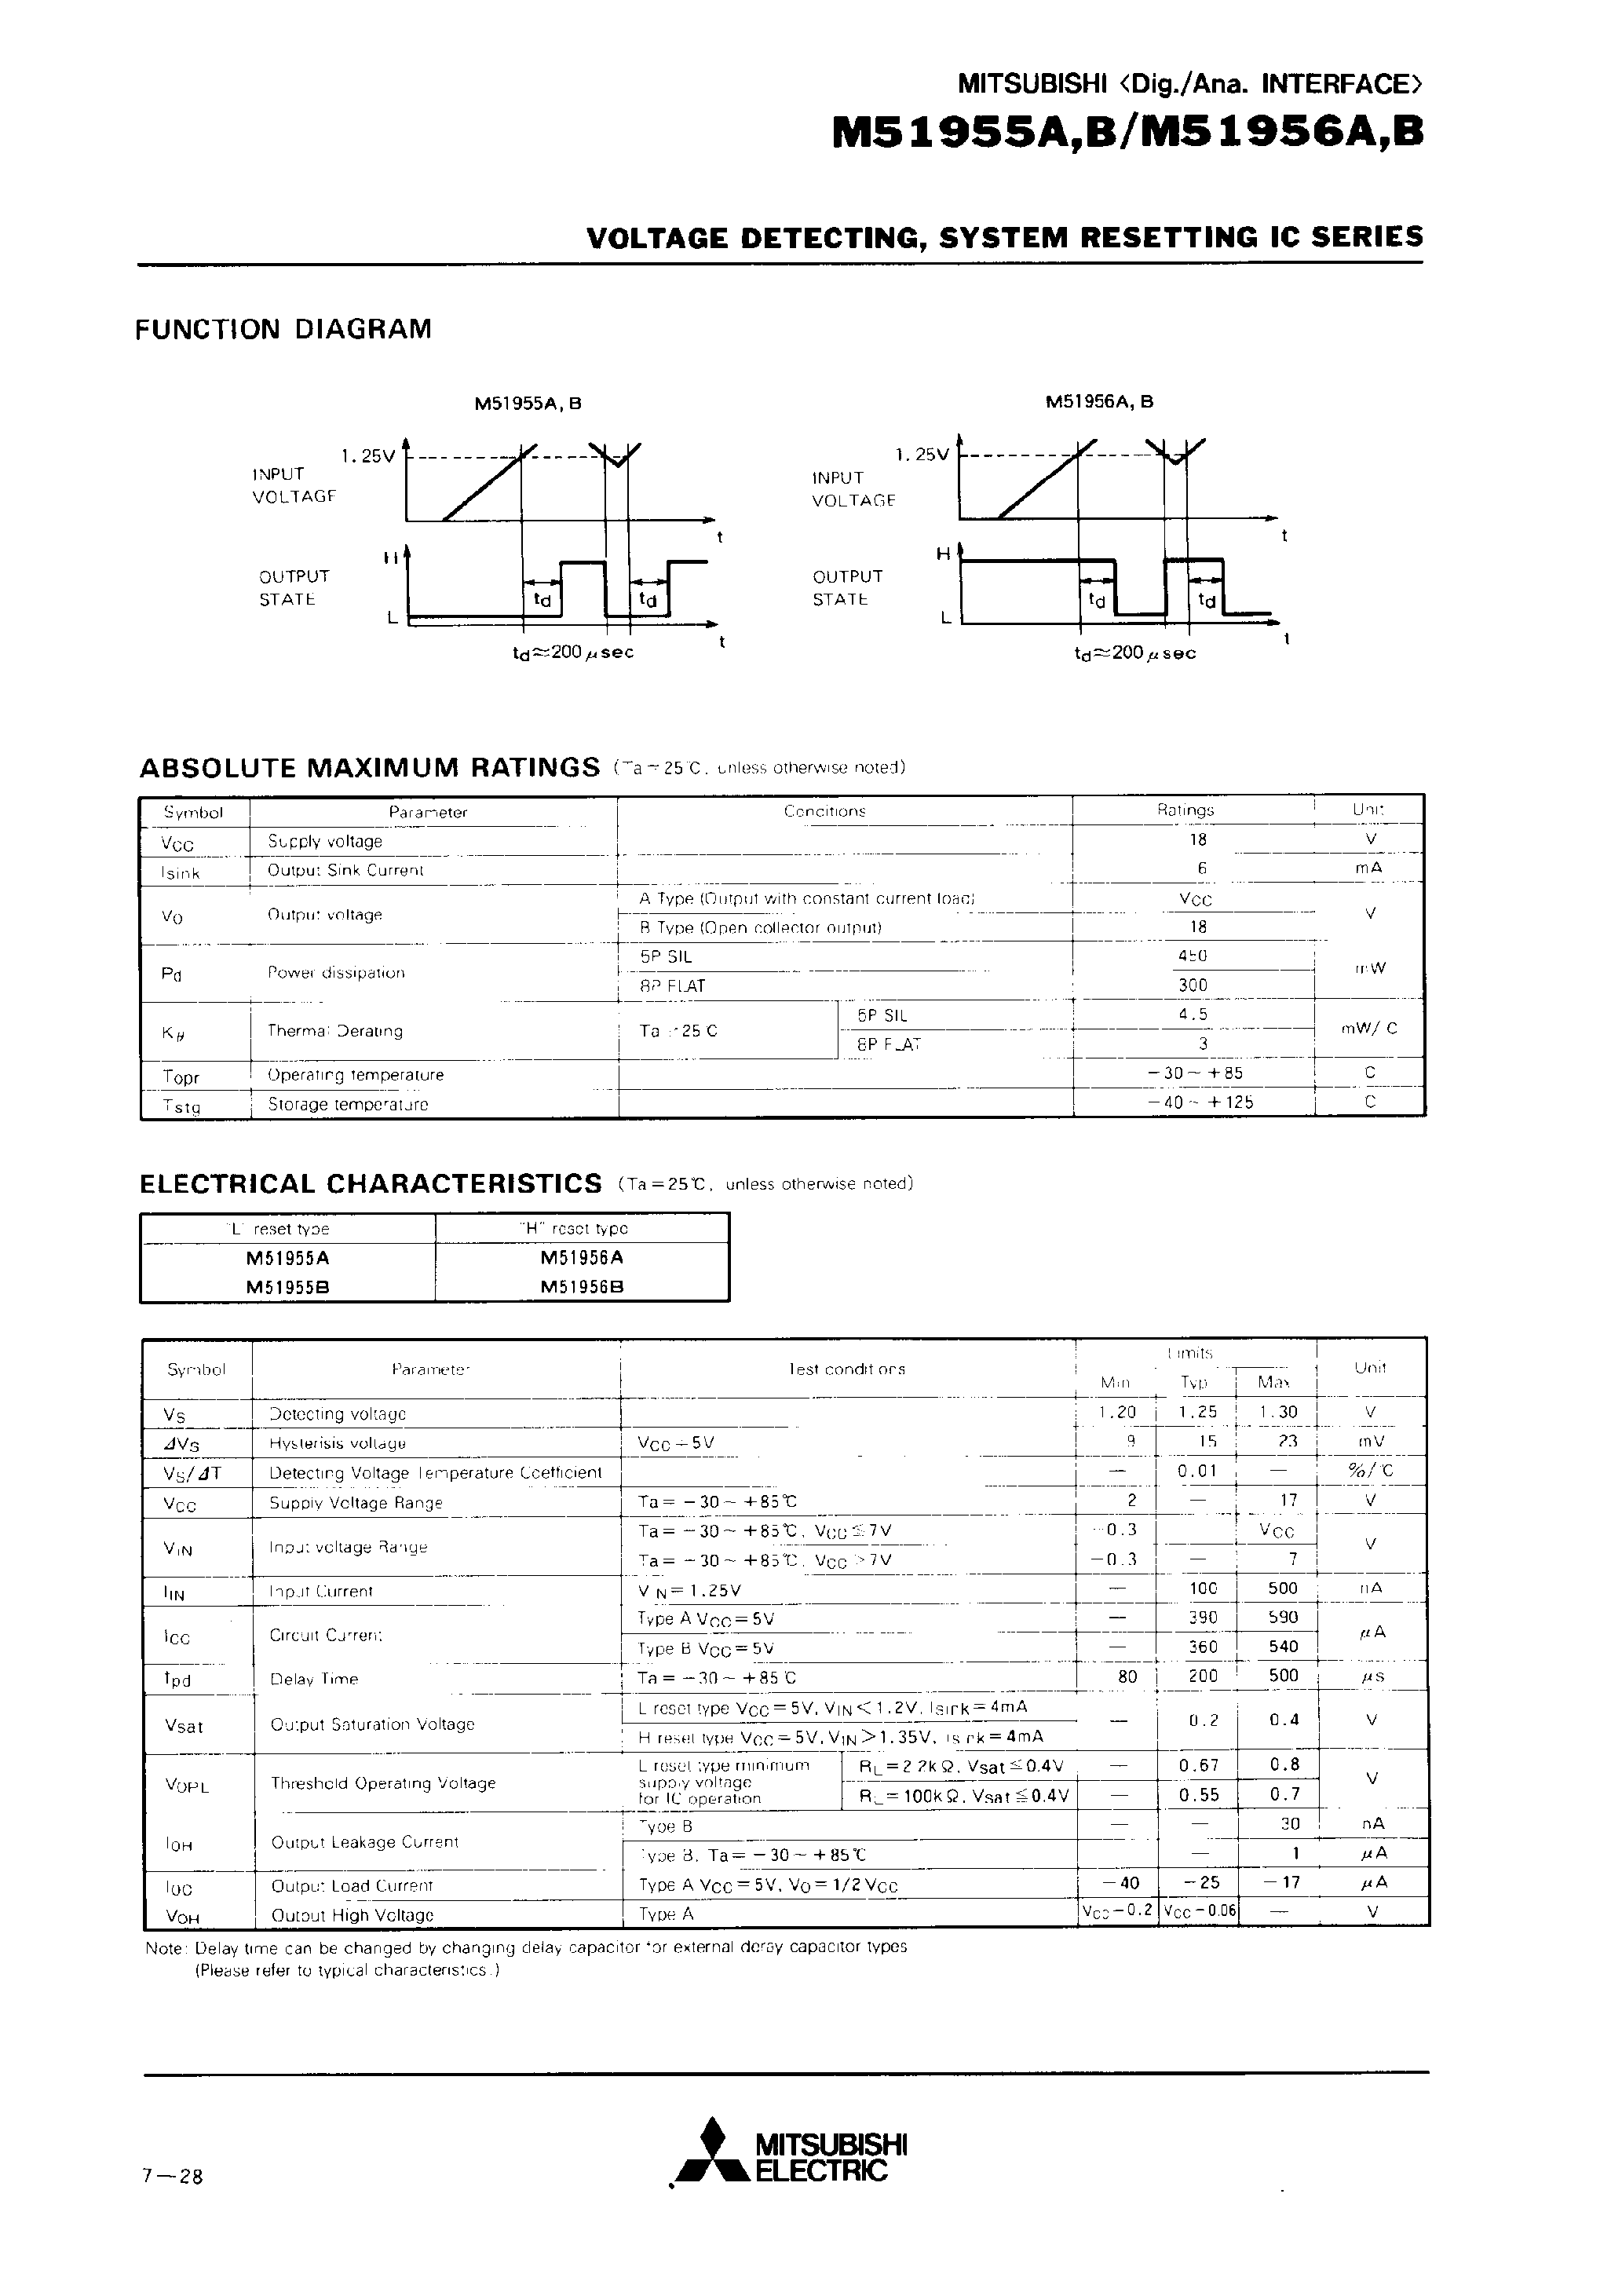 Datasheet M51956A - VOLTAGE DETECTING/ SYSTEM RESETTING IC SERIES page 2